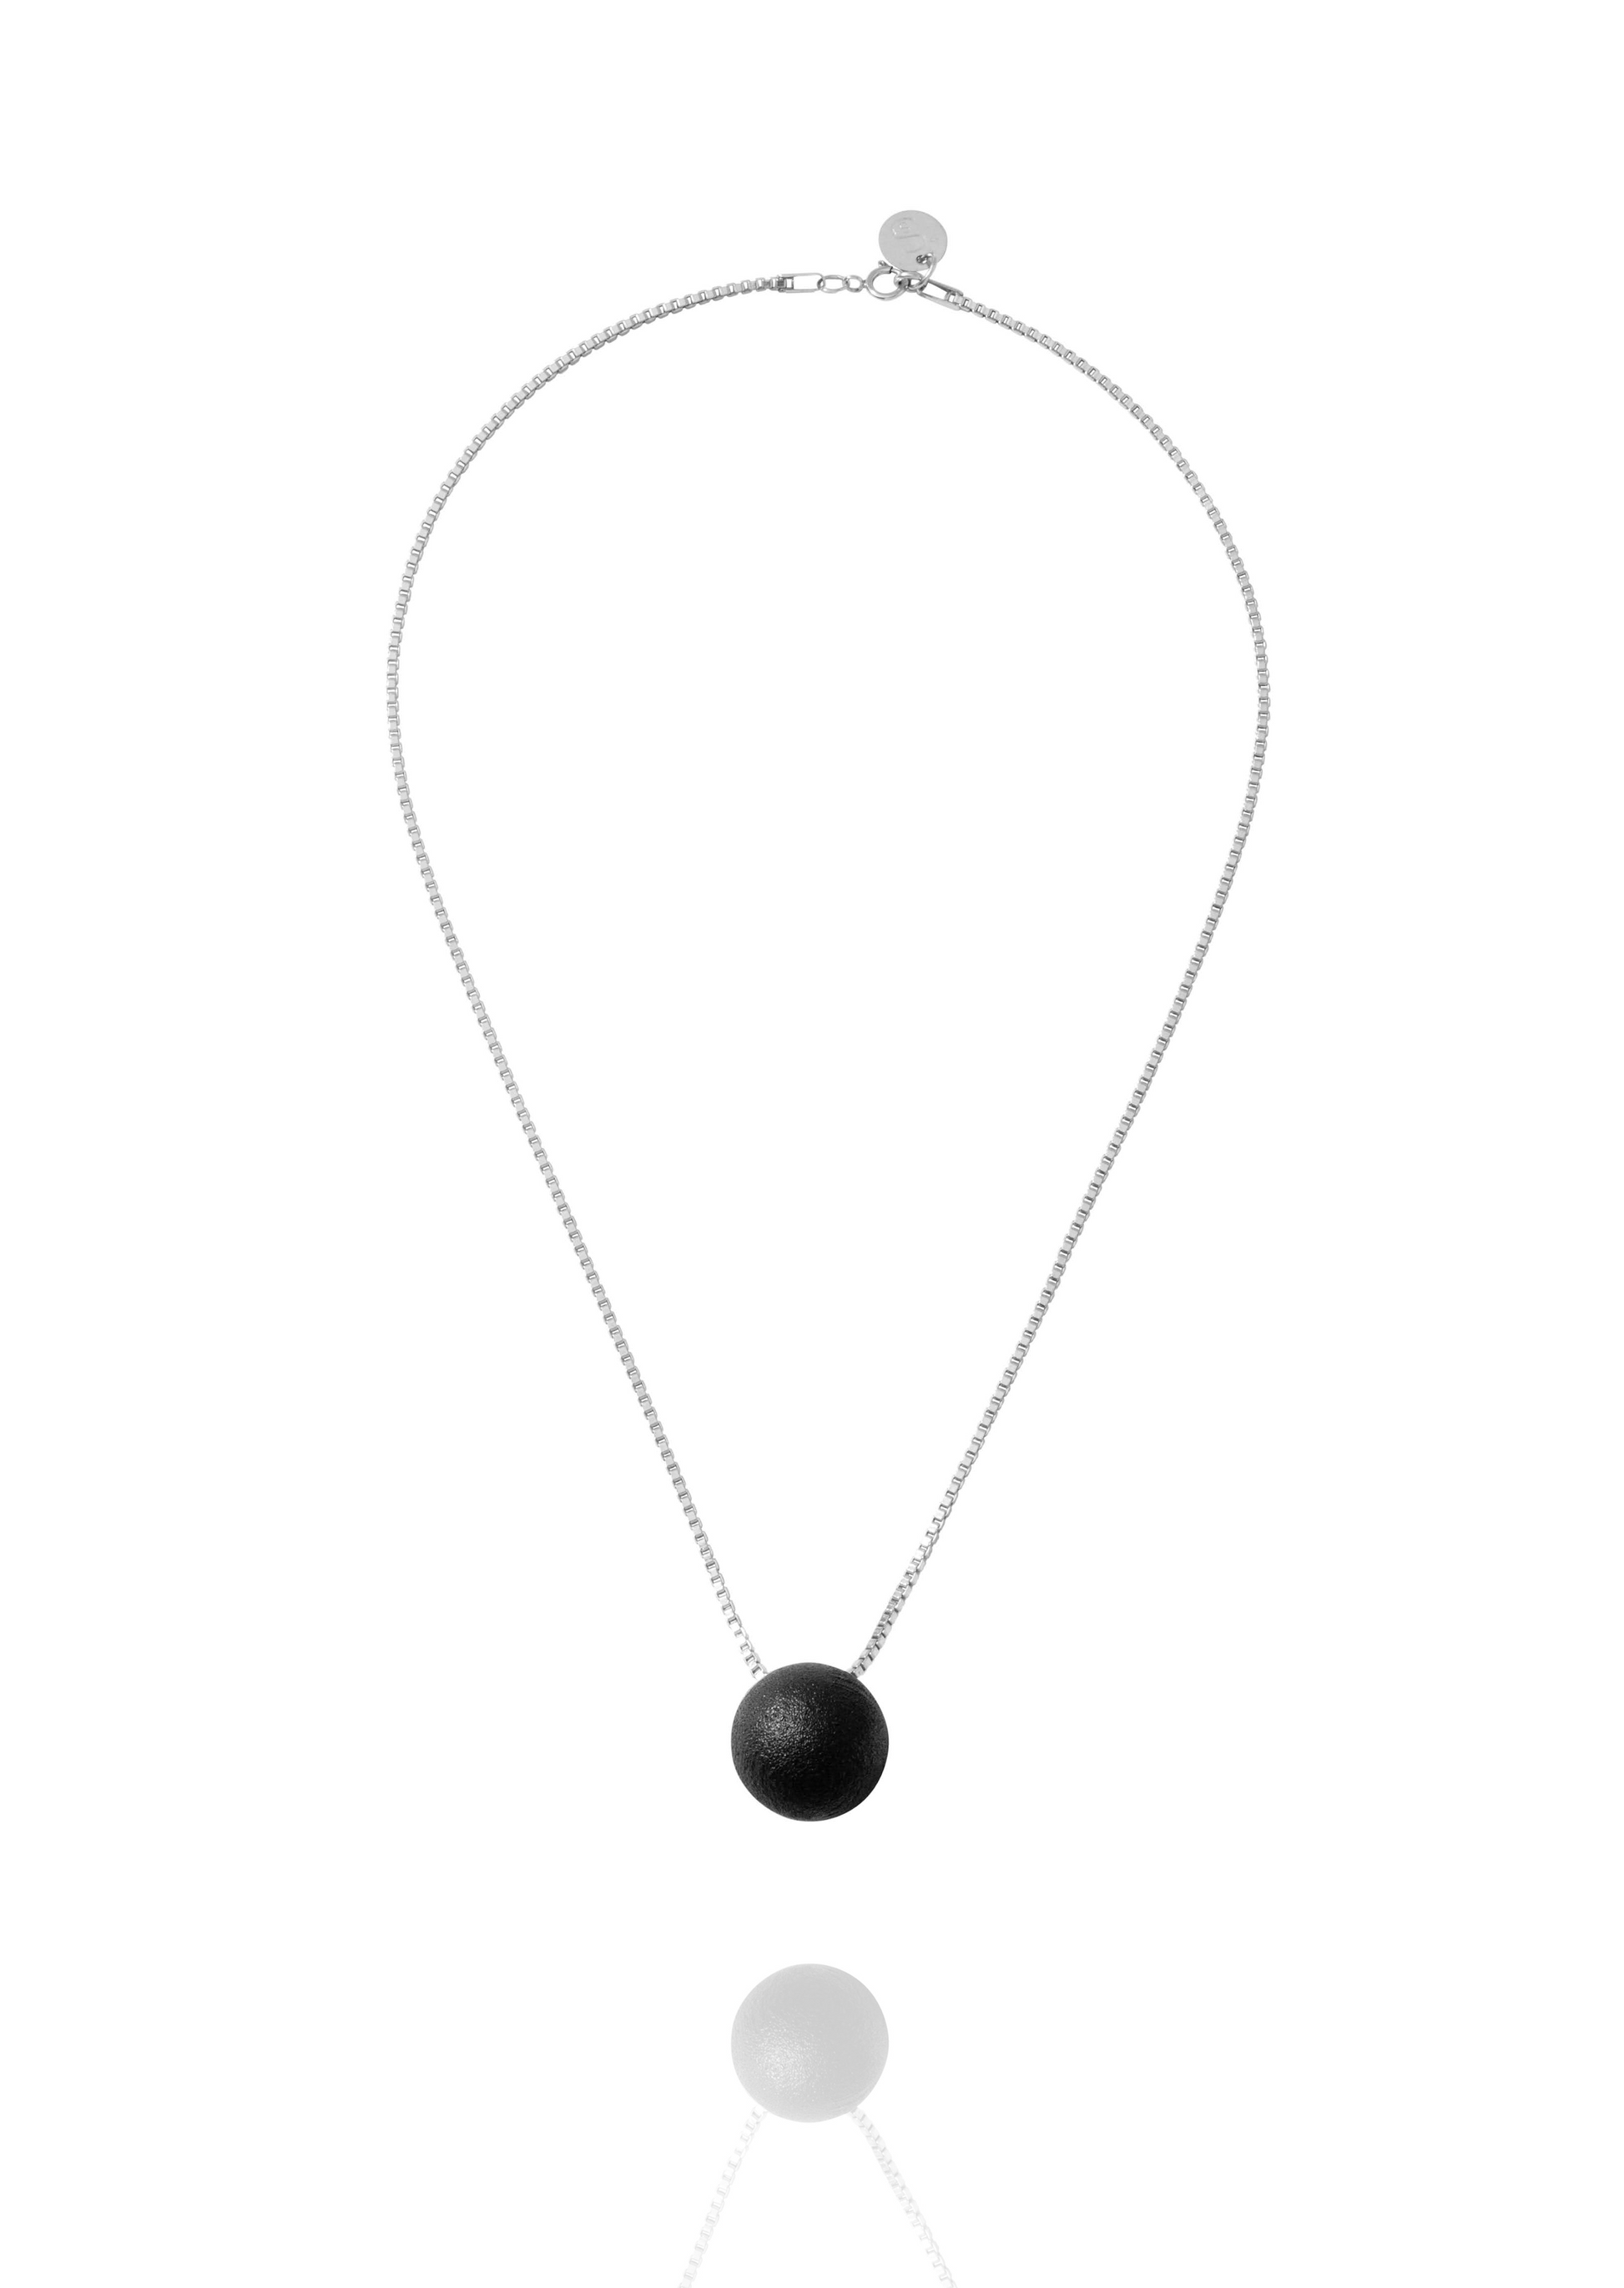 Charcoal Alloy Soul Sphere Necklace white background full view